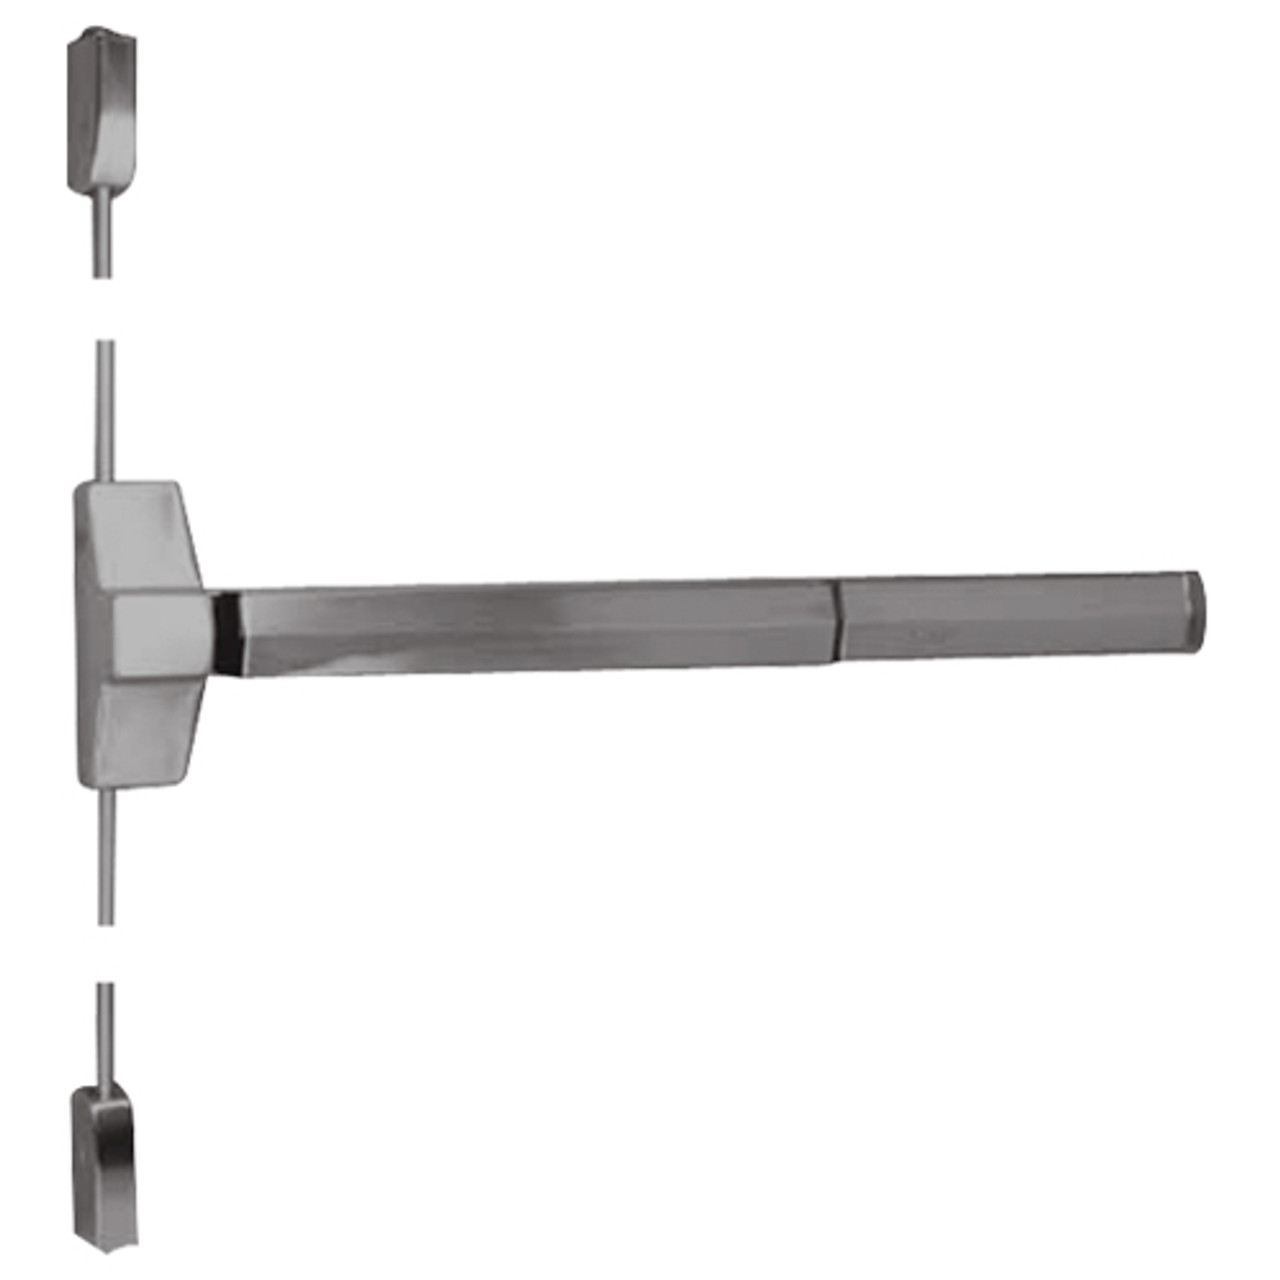 7110F-48-630 Yale 7000 Series Fire Rated Surface Vertical Rod Exit Device in Satin Stainless Steel